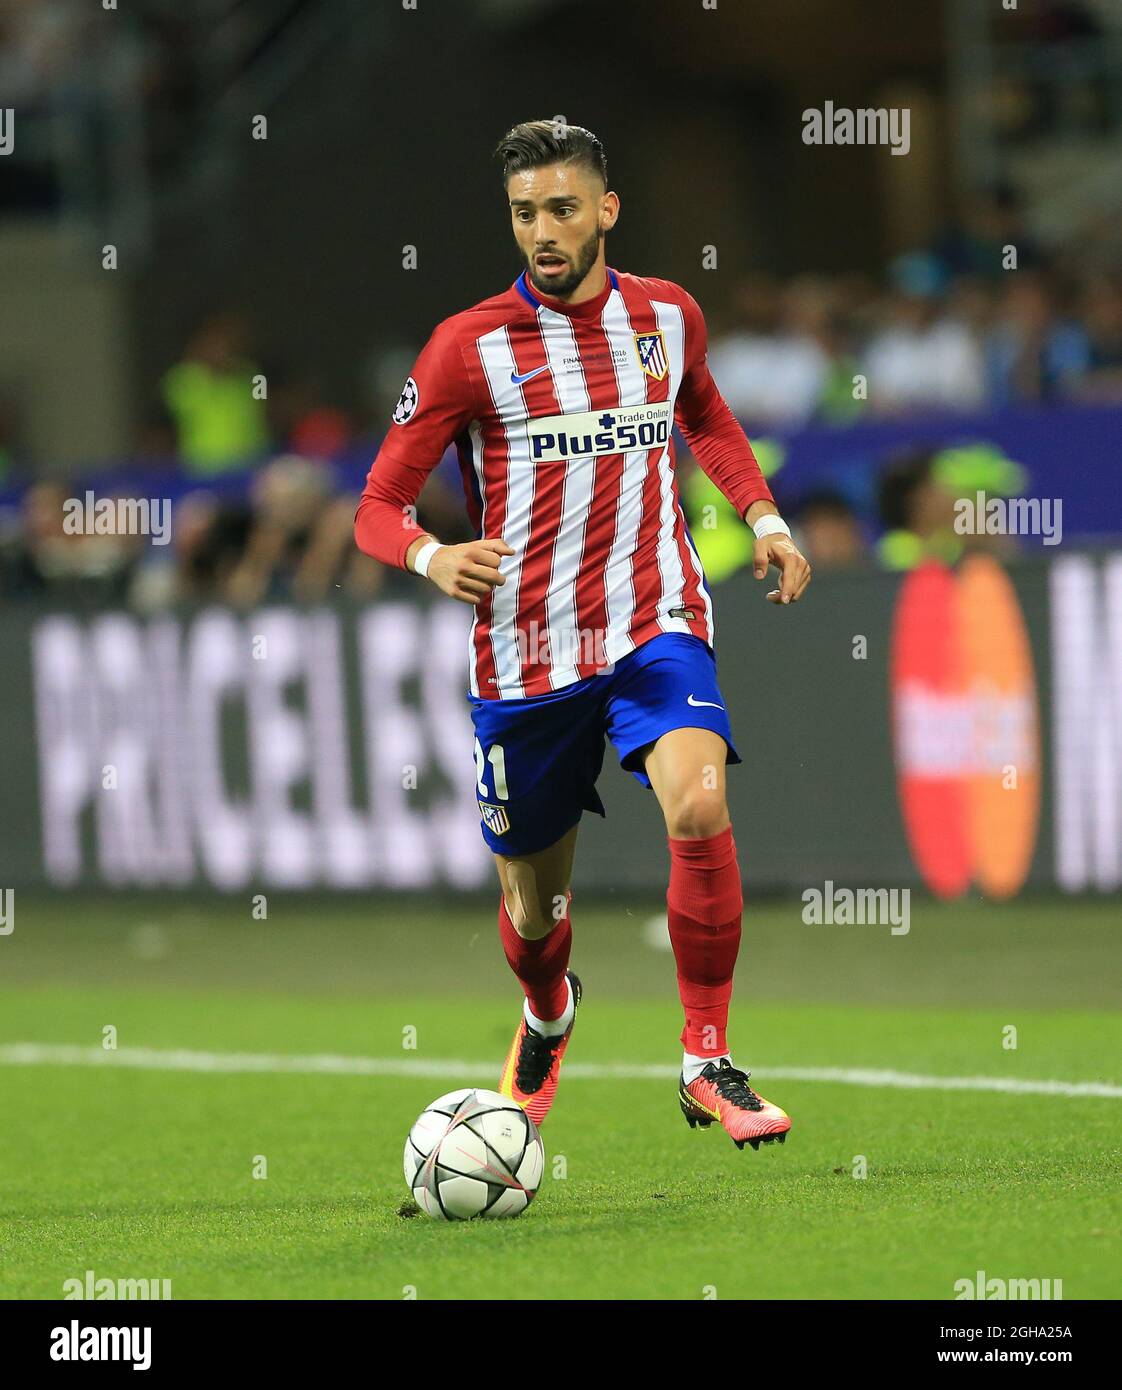 Atletico Madrids Yannick Carrasco in action during the UEFA Champions League Final match at the Stadio Giuseppe Meazza